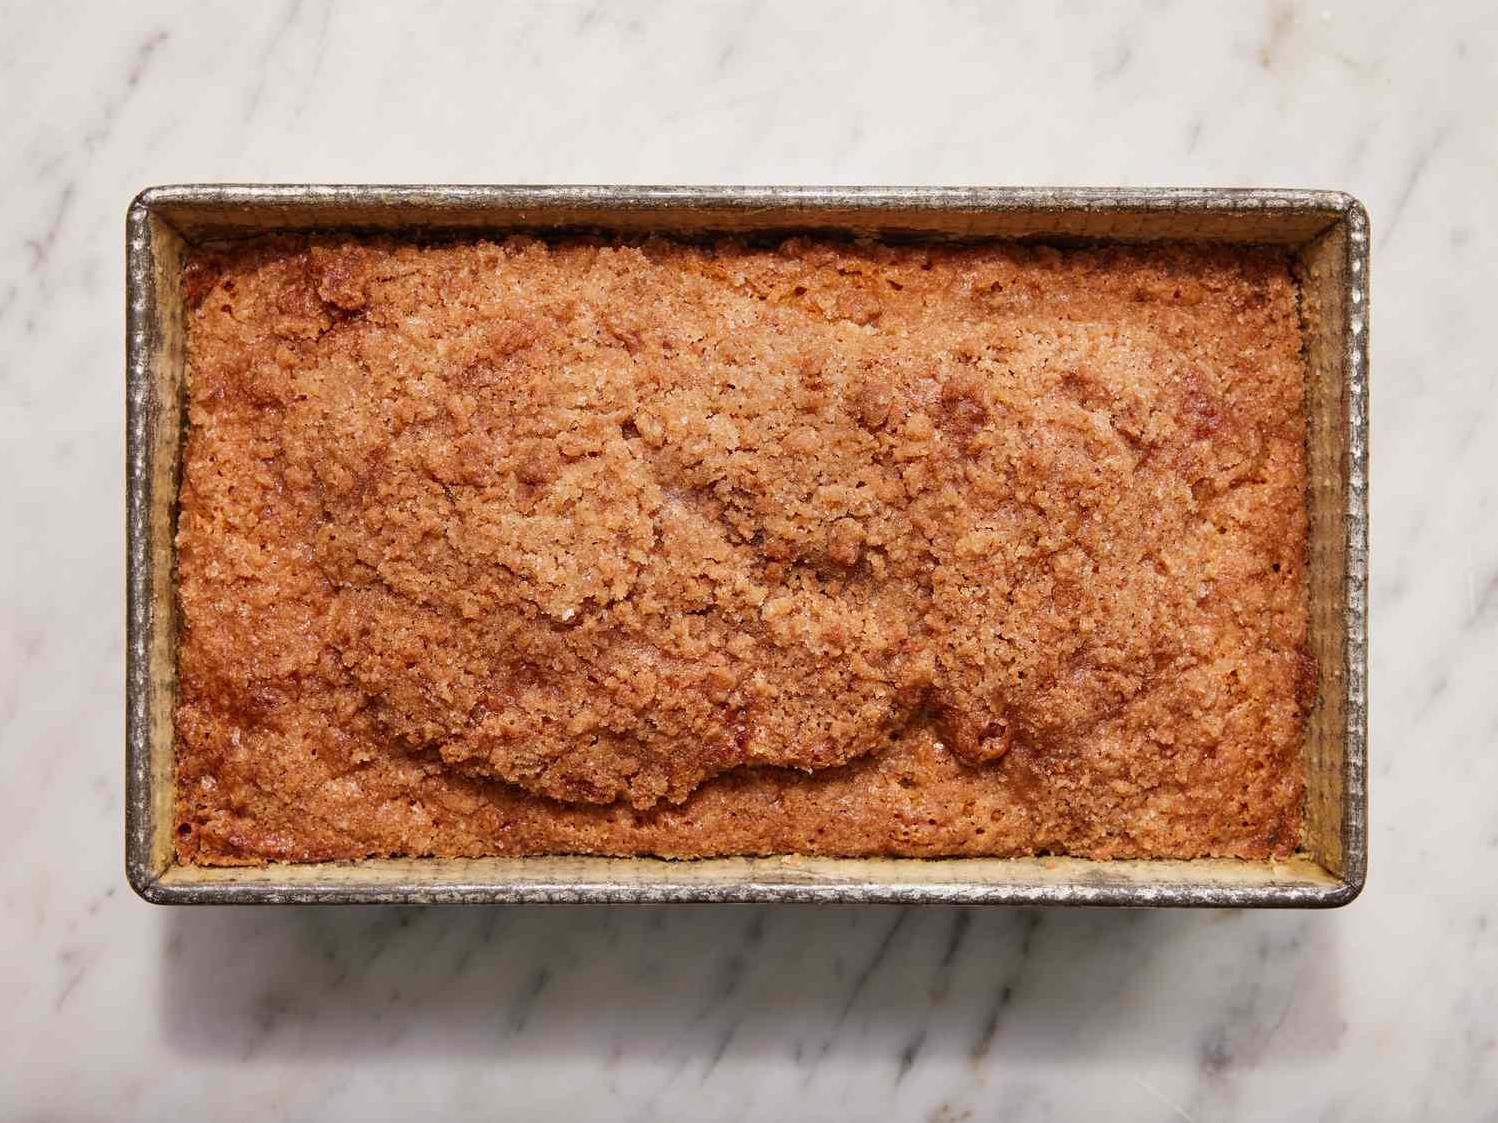  Moist, crumbly, and heavenly, this coffee cake pairs perfectly with your favorite cup of joe